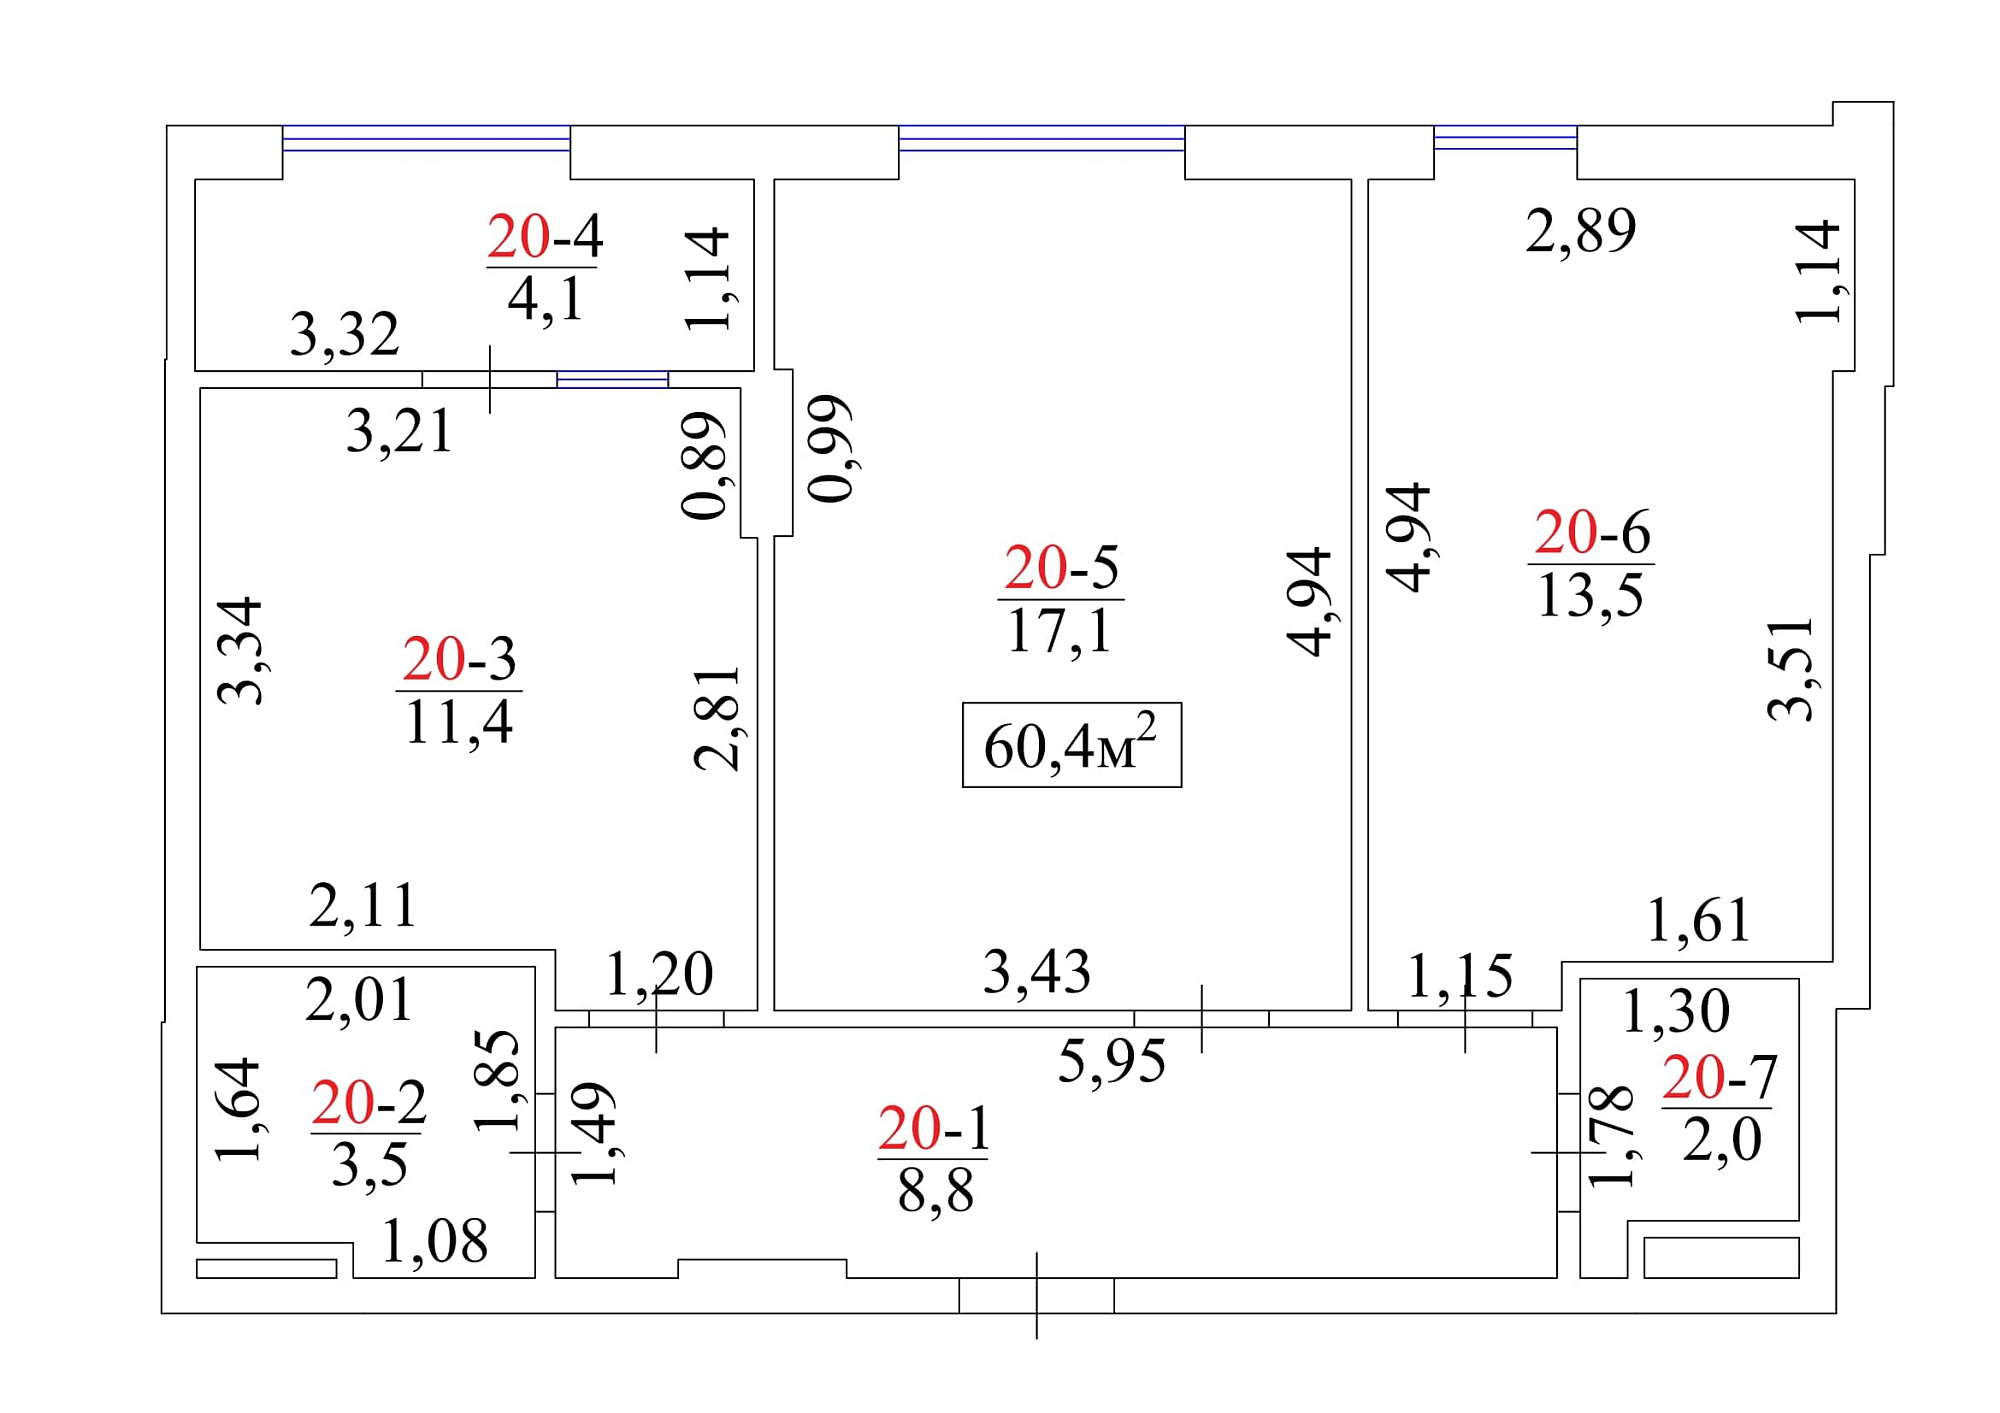 Planning 2-rm flats area 60.4m2, AB-01-03/00021.